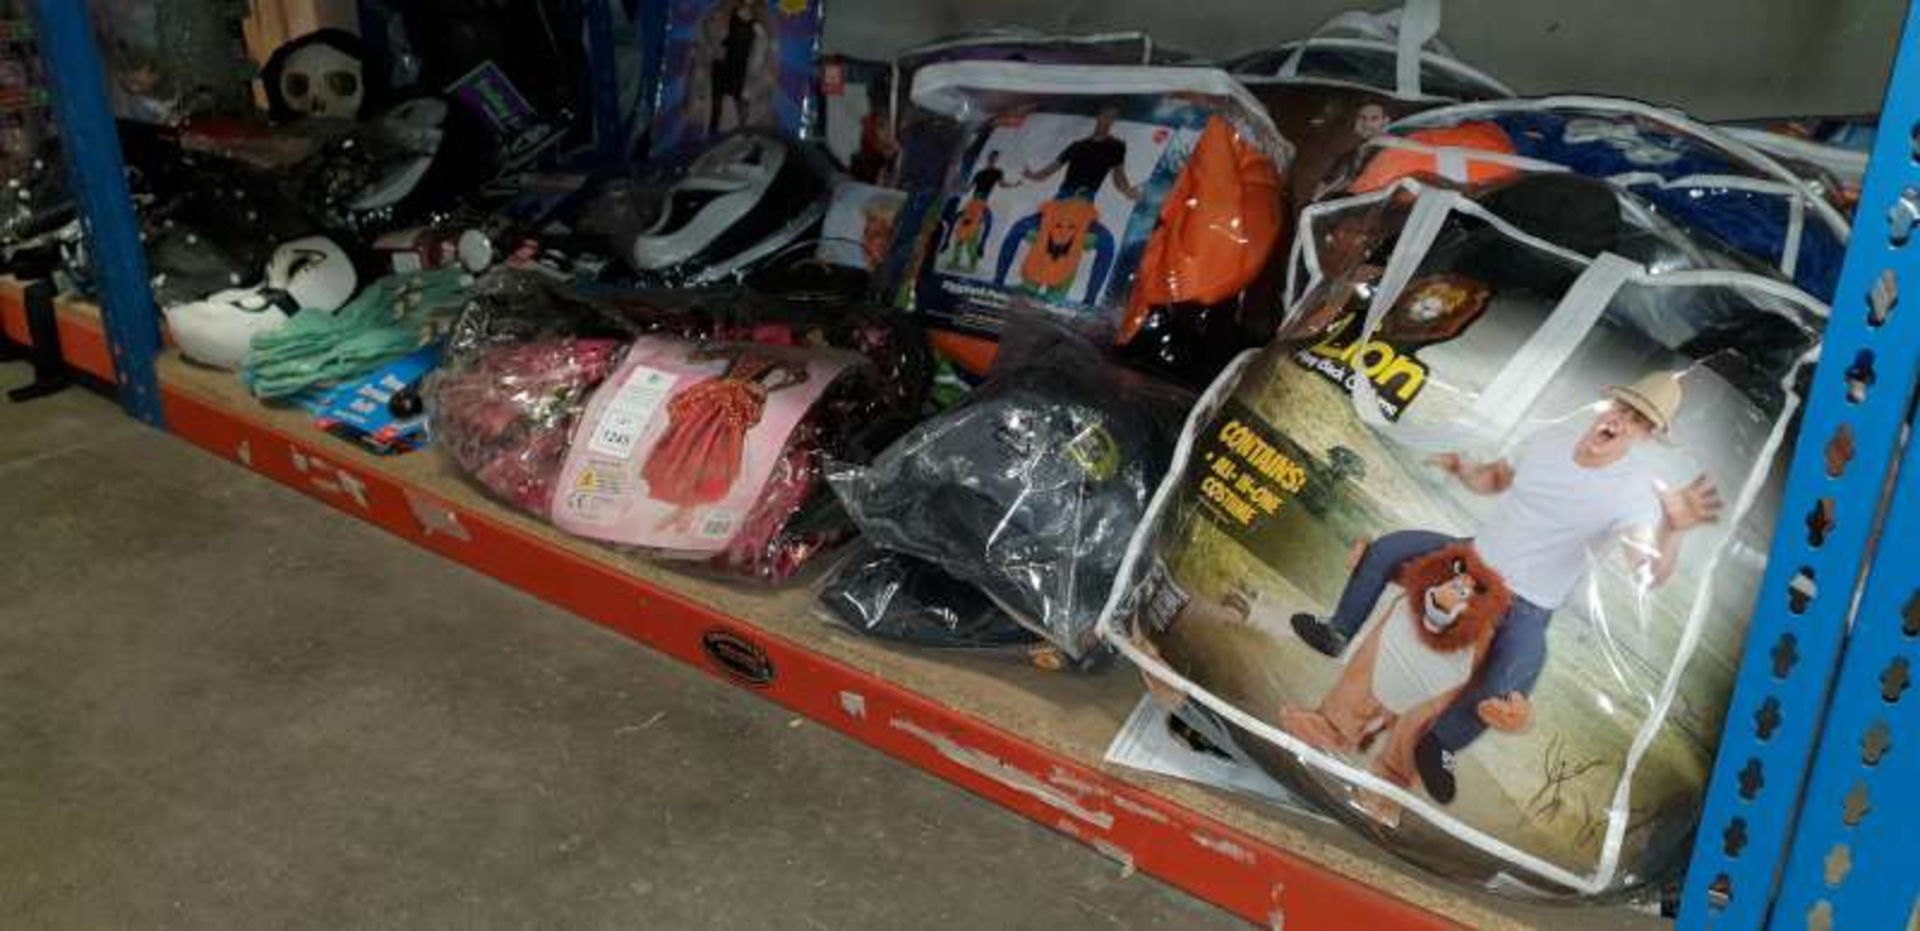 LOT CONTAINING A QTY OF VARIOUS FANCY DRESS COSTUMES AND MASKS